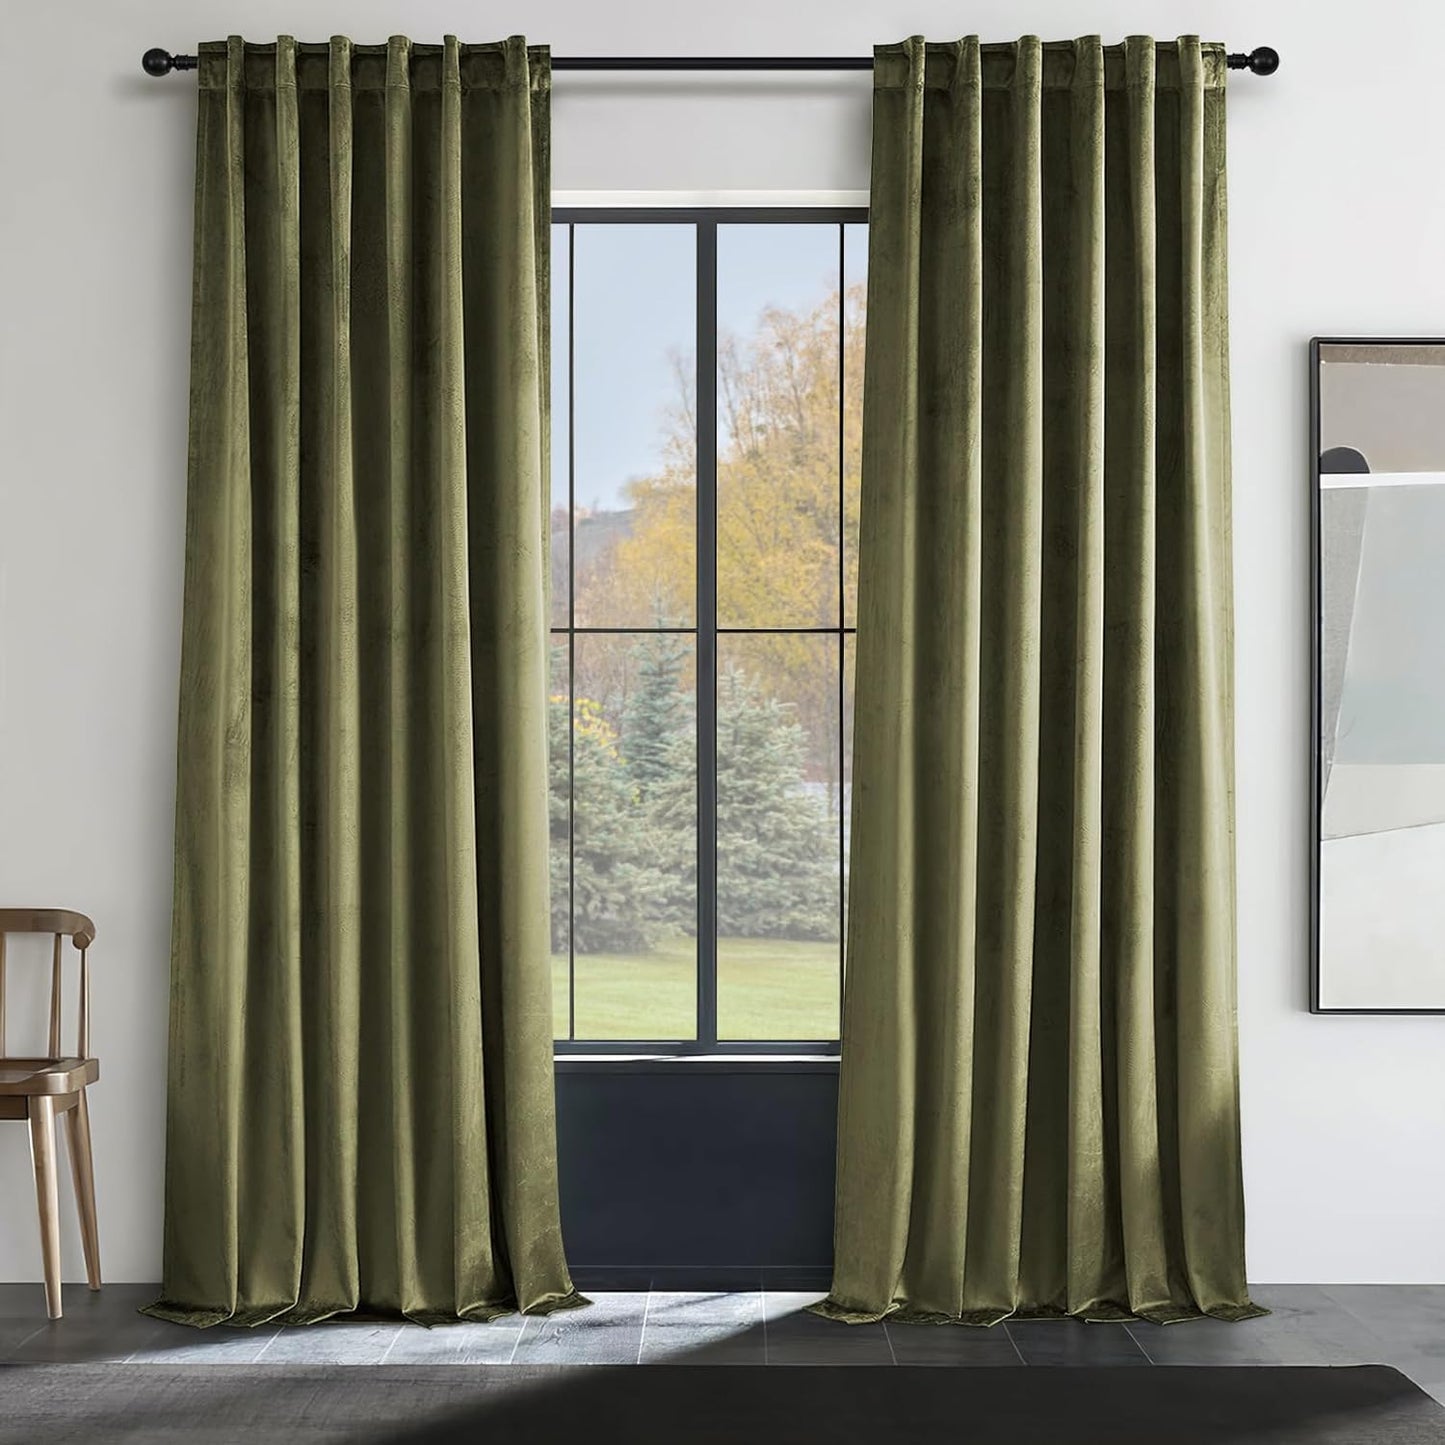 Topfinel Olive Green Velvet Curtains 84 Inches Long for Living Room,Blackout Thermal Insulated Curtains for Bedroom,Back Tab Modern Window Treatment for Living Room,52X84 Inch Length,Olive Green  Top Fine Olive Green 52" X 80" 